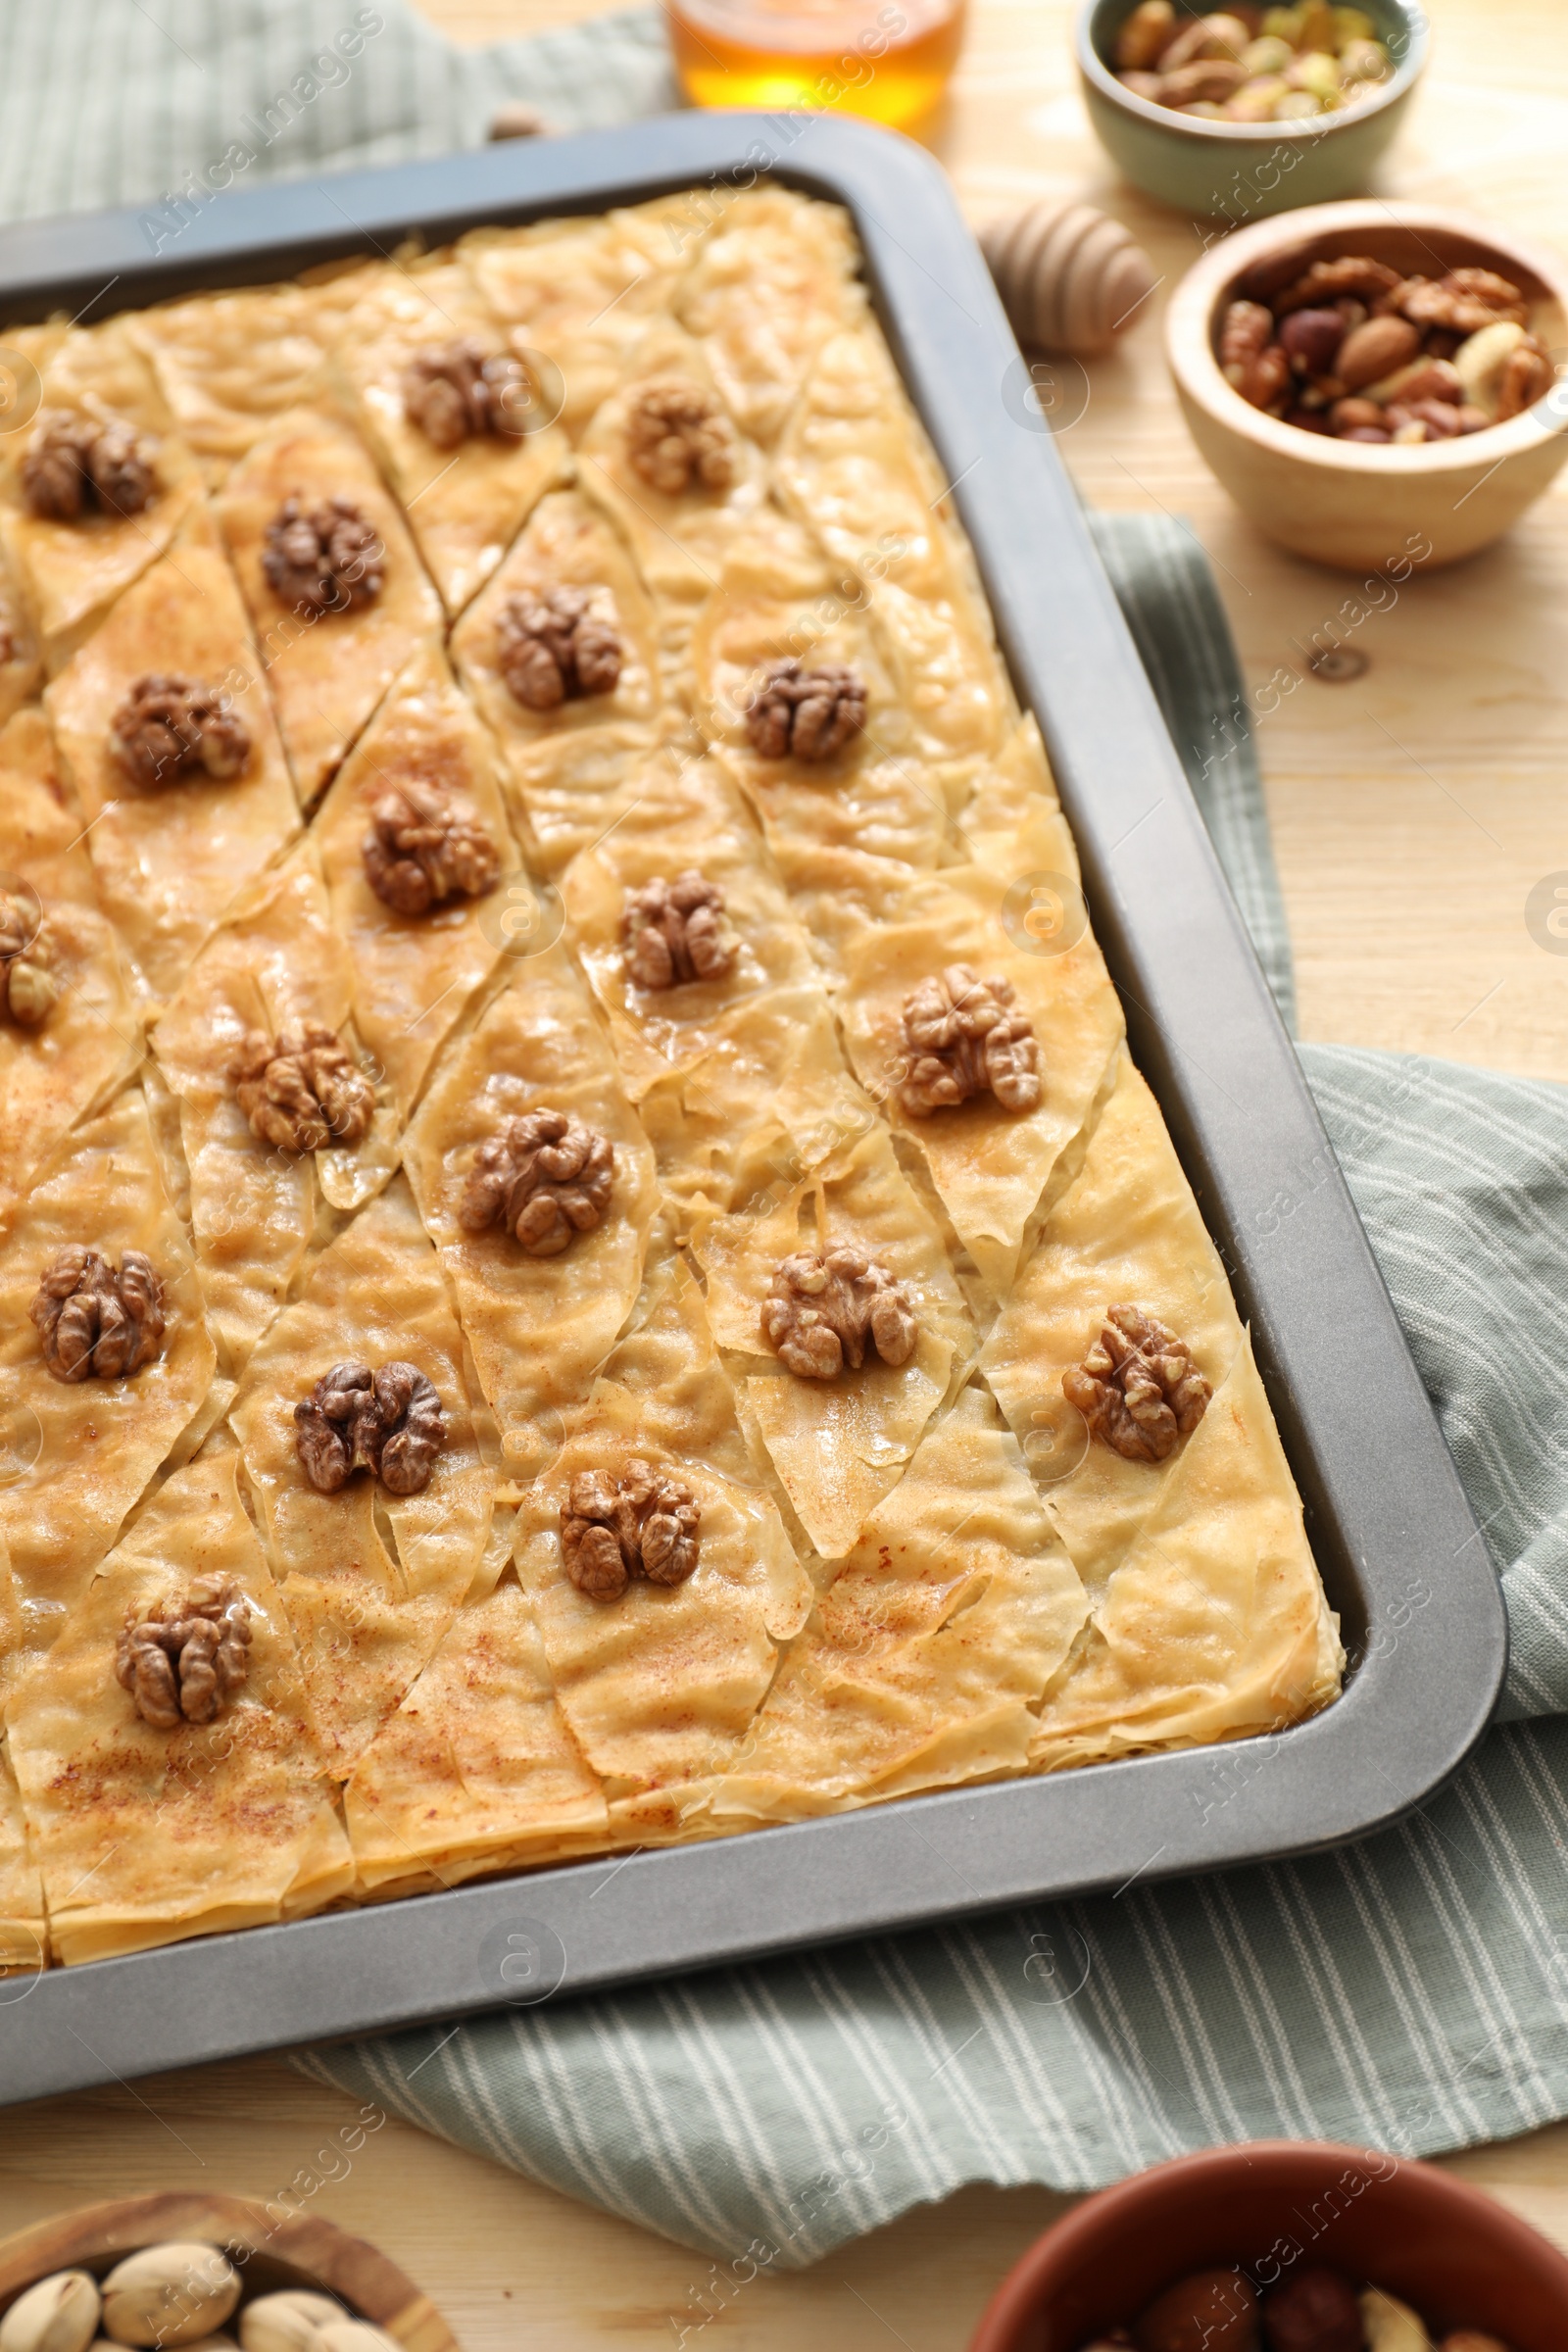 Photo of Delicious baklava with walnuts in baking pan on wooden table